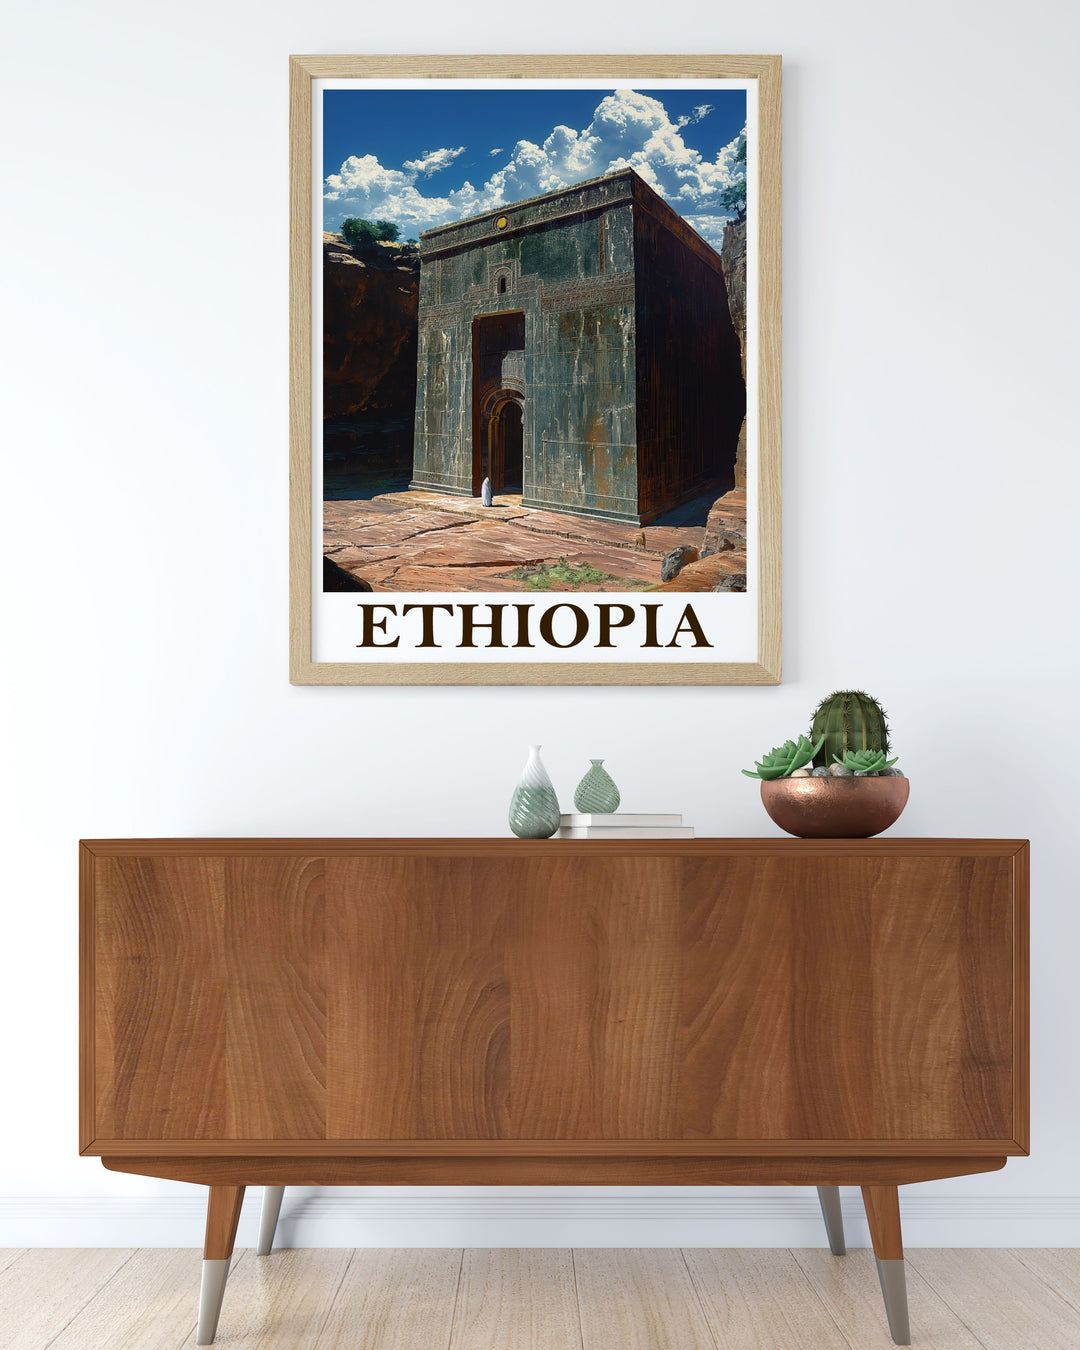 Ethiopia Art Print of Lalibela Rock Hewn Churches highlighting their architectural marvels with vibrant colors and fine lines a stunning reminder of Ethiopias enduring cultural heritage perfect for any room